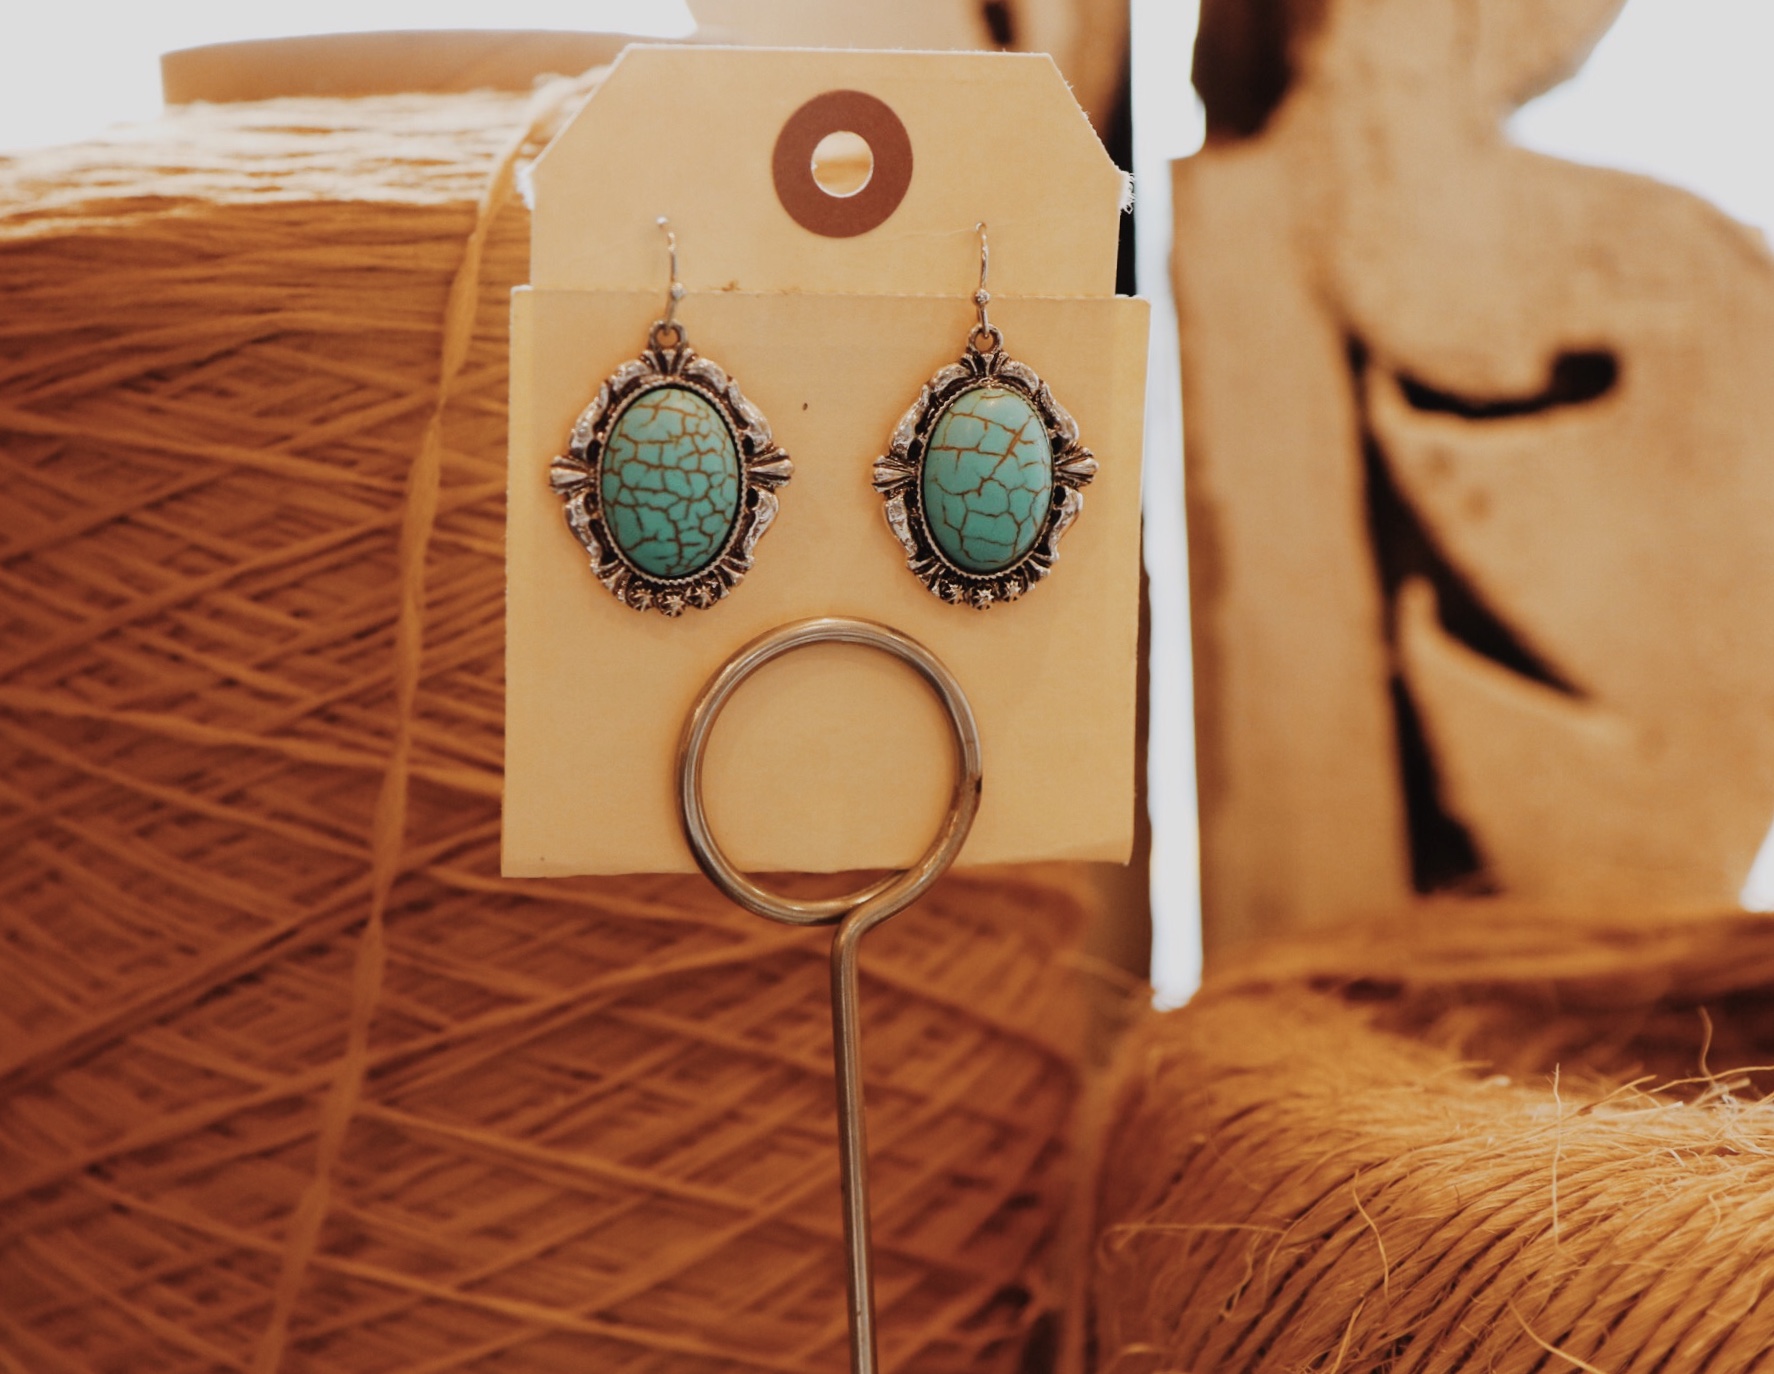 These adorable turquoise earrings measure 1.5 inches long!